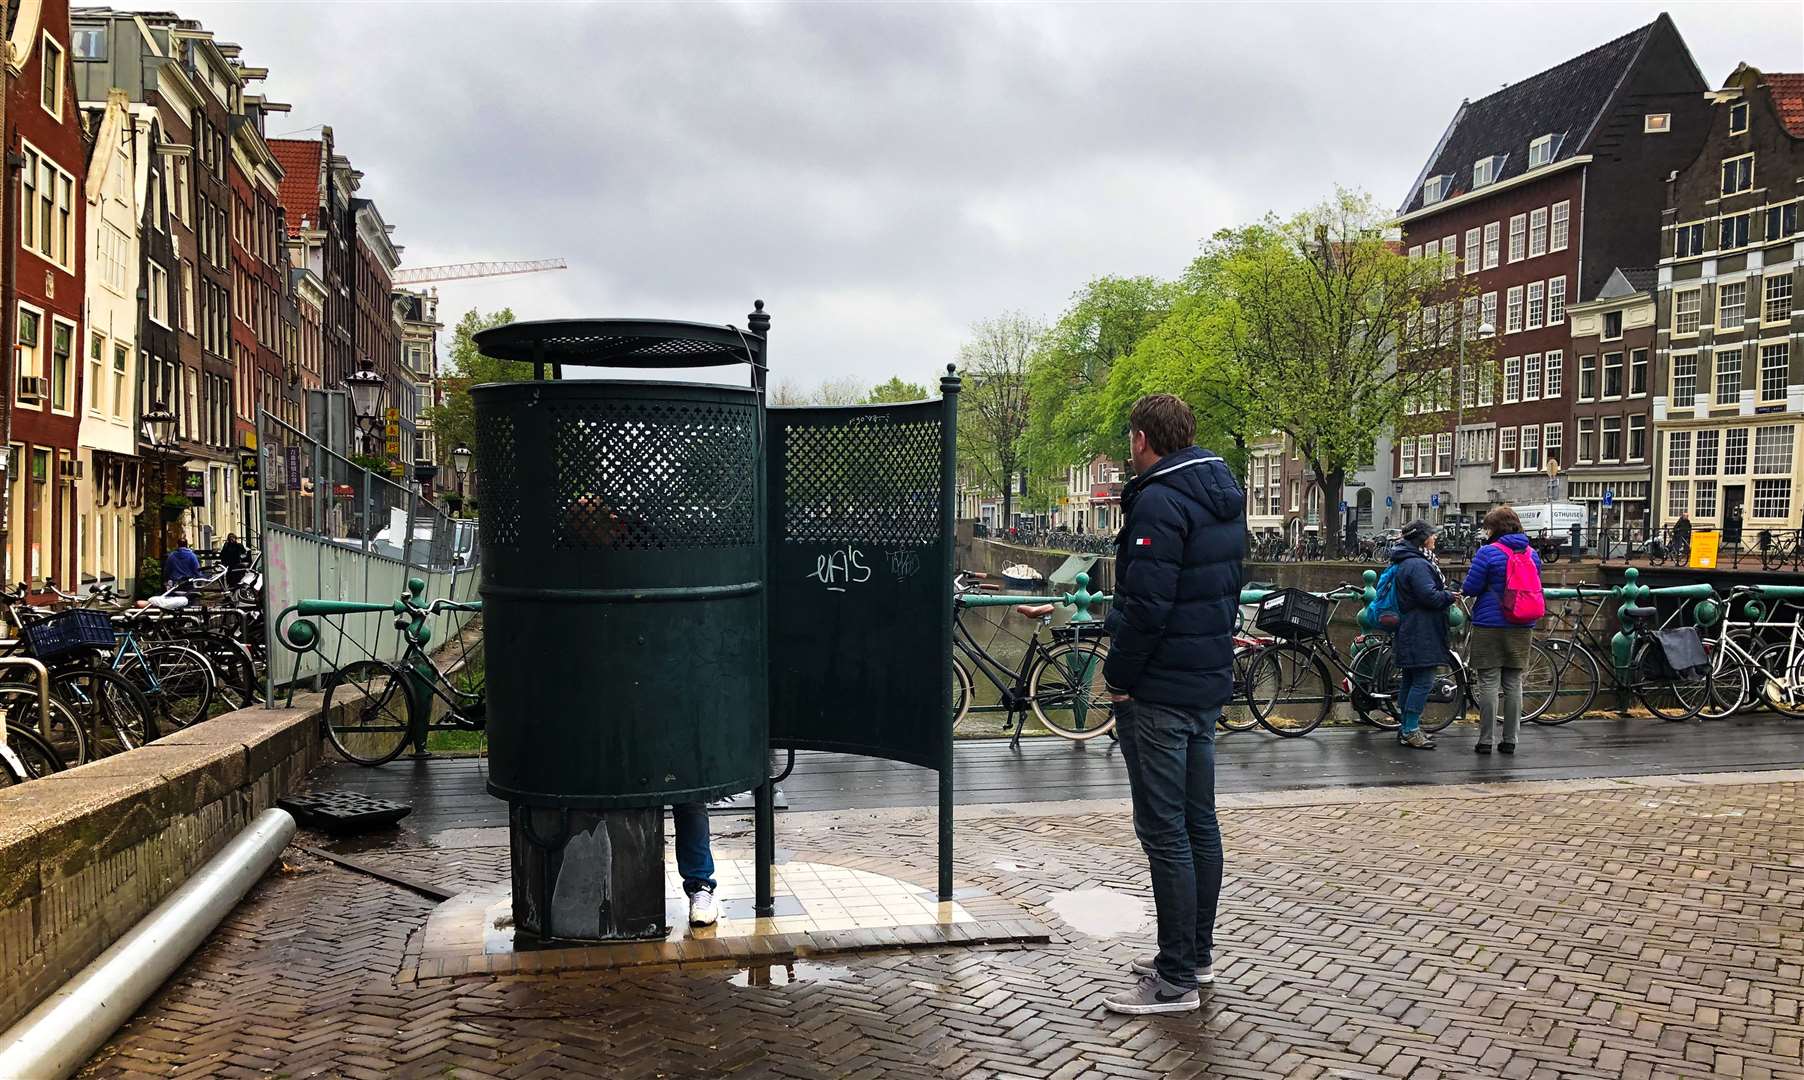 Council bosses in Canterbury are considering installing outdoor urinals - like this one in Amsterdam. Picture: Istock / Jann Huizenga